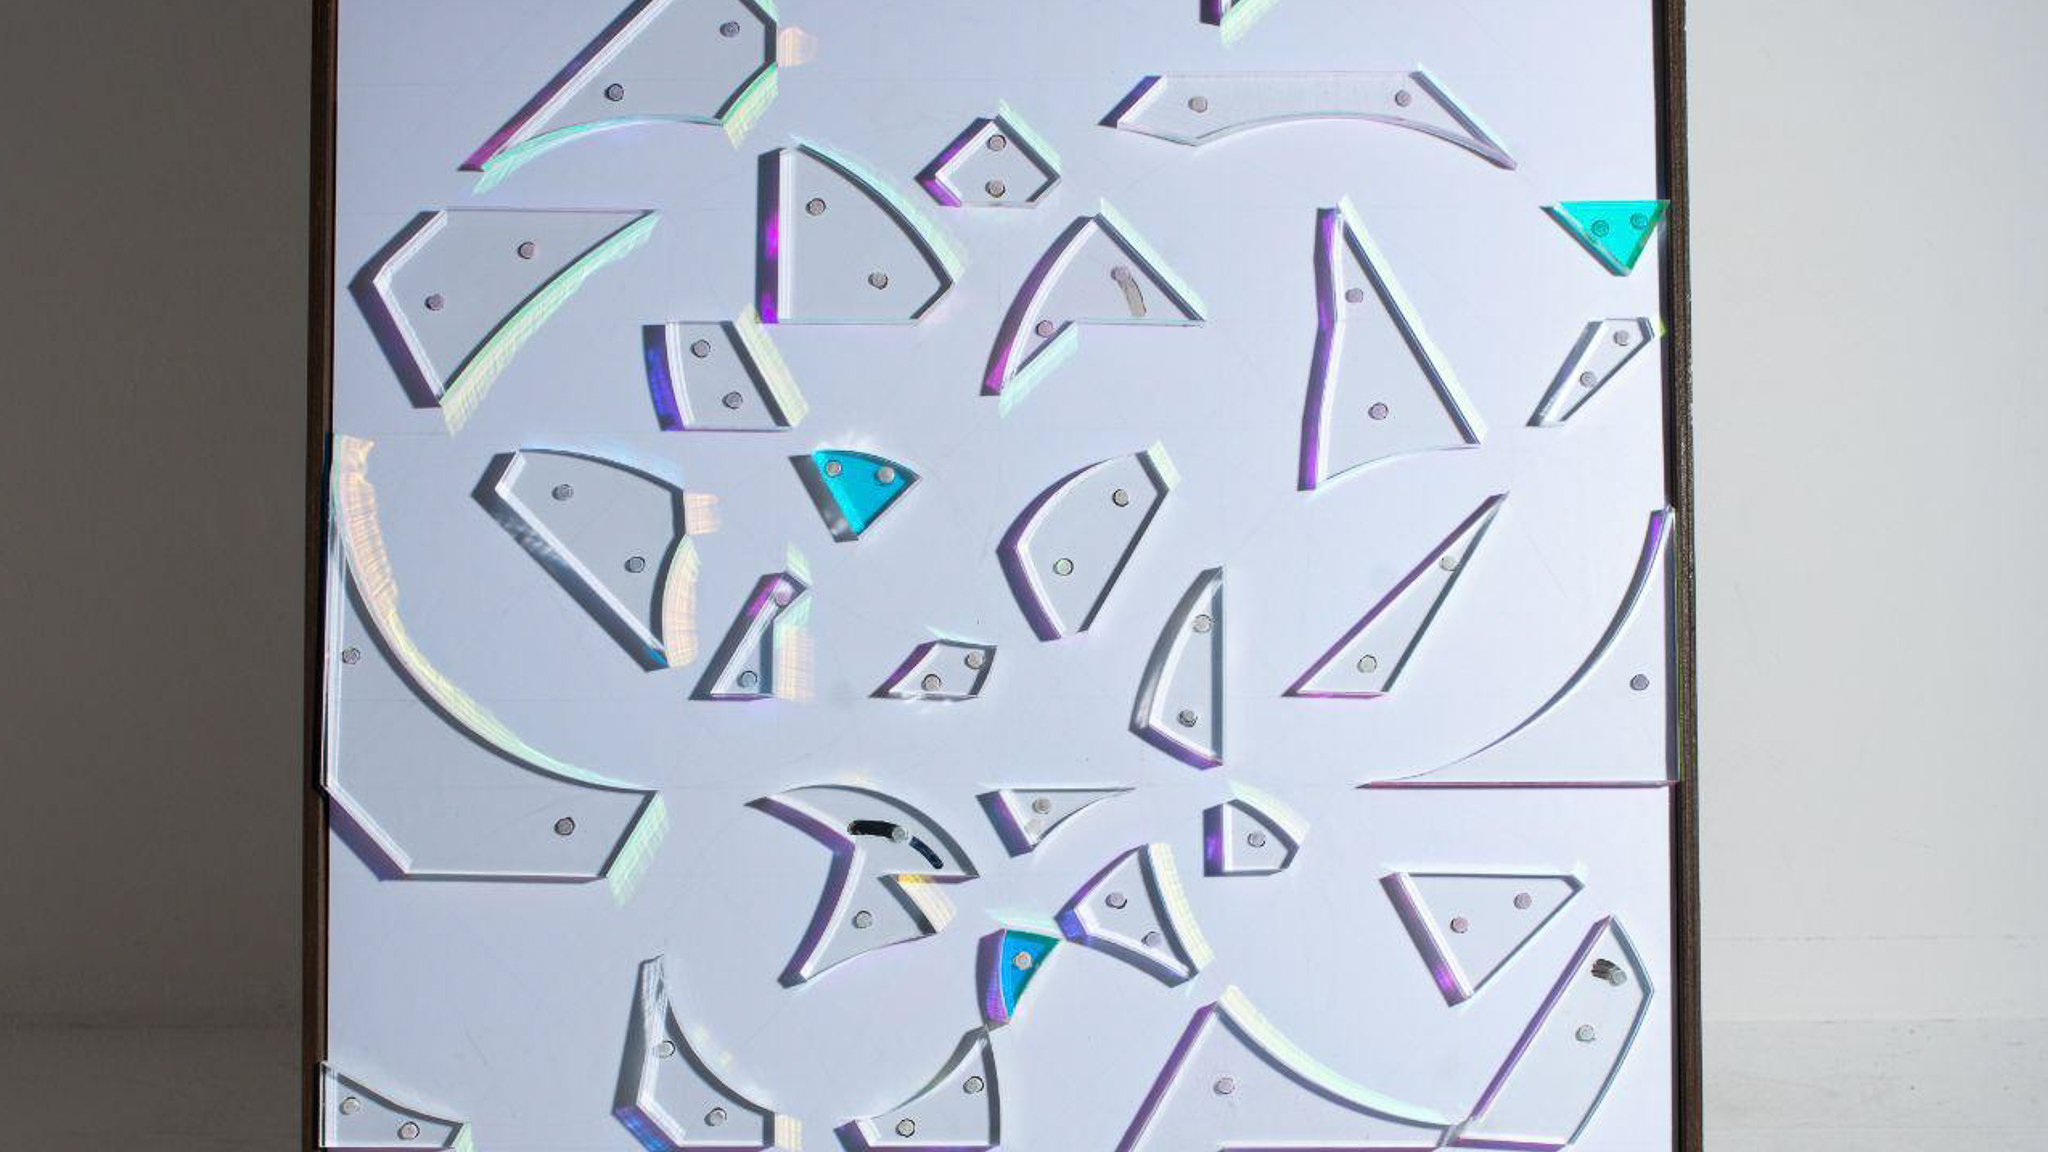 Front view of Frameworks: Of The Mind. Dichroic prisms placed as obstacles on white board.